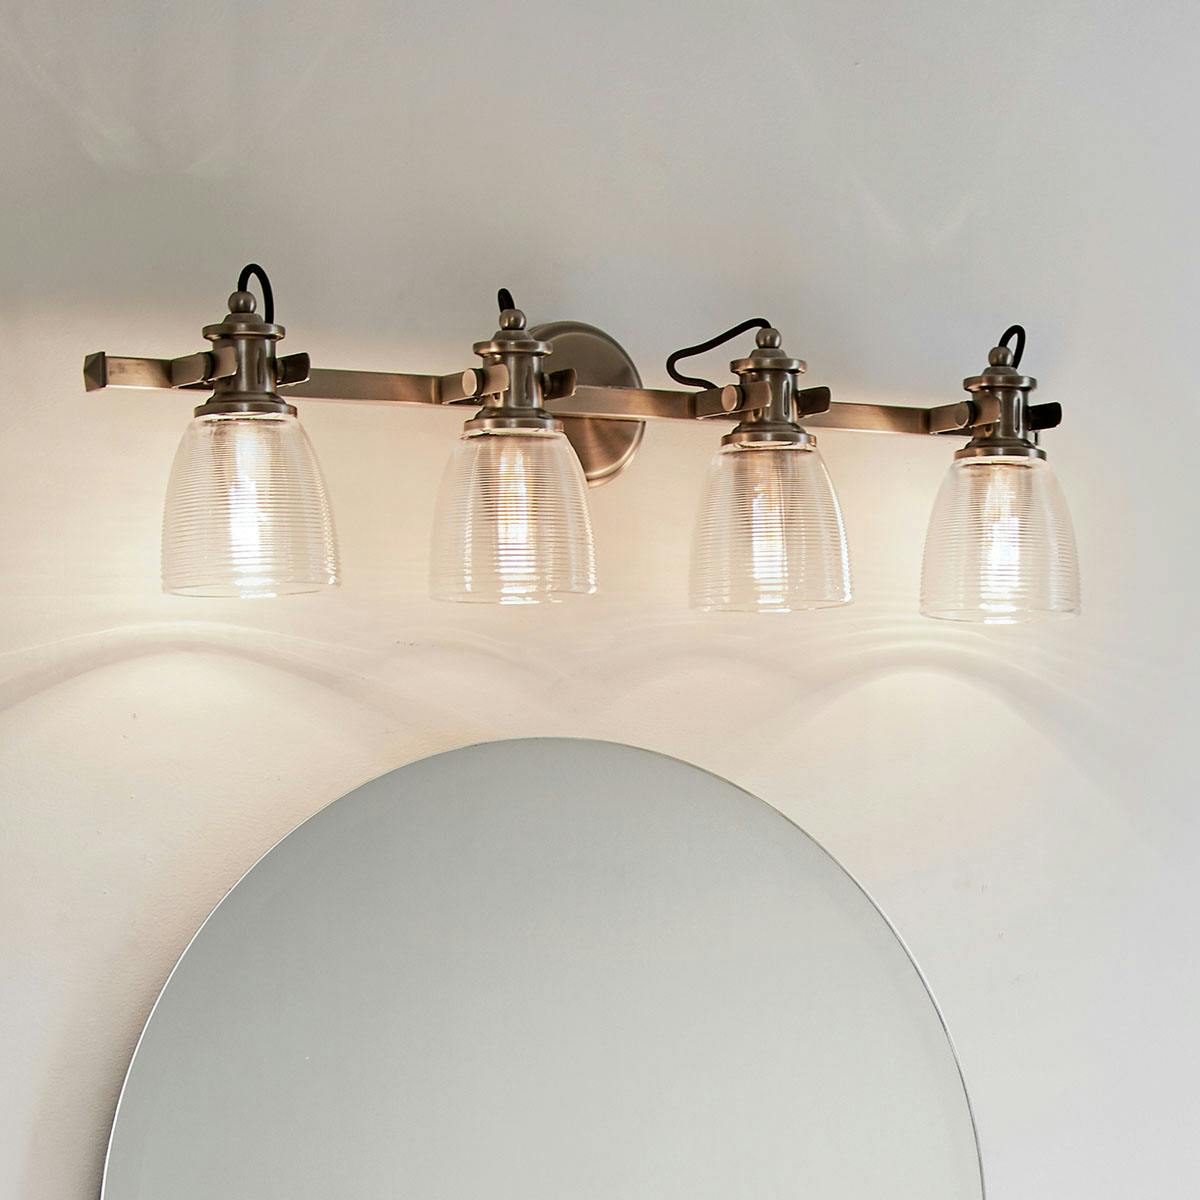 Day time Bathroom featuring Flagship vanity light 45874CLP